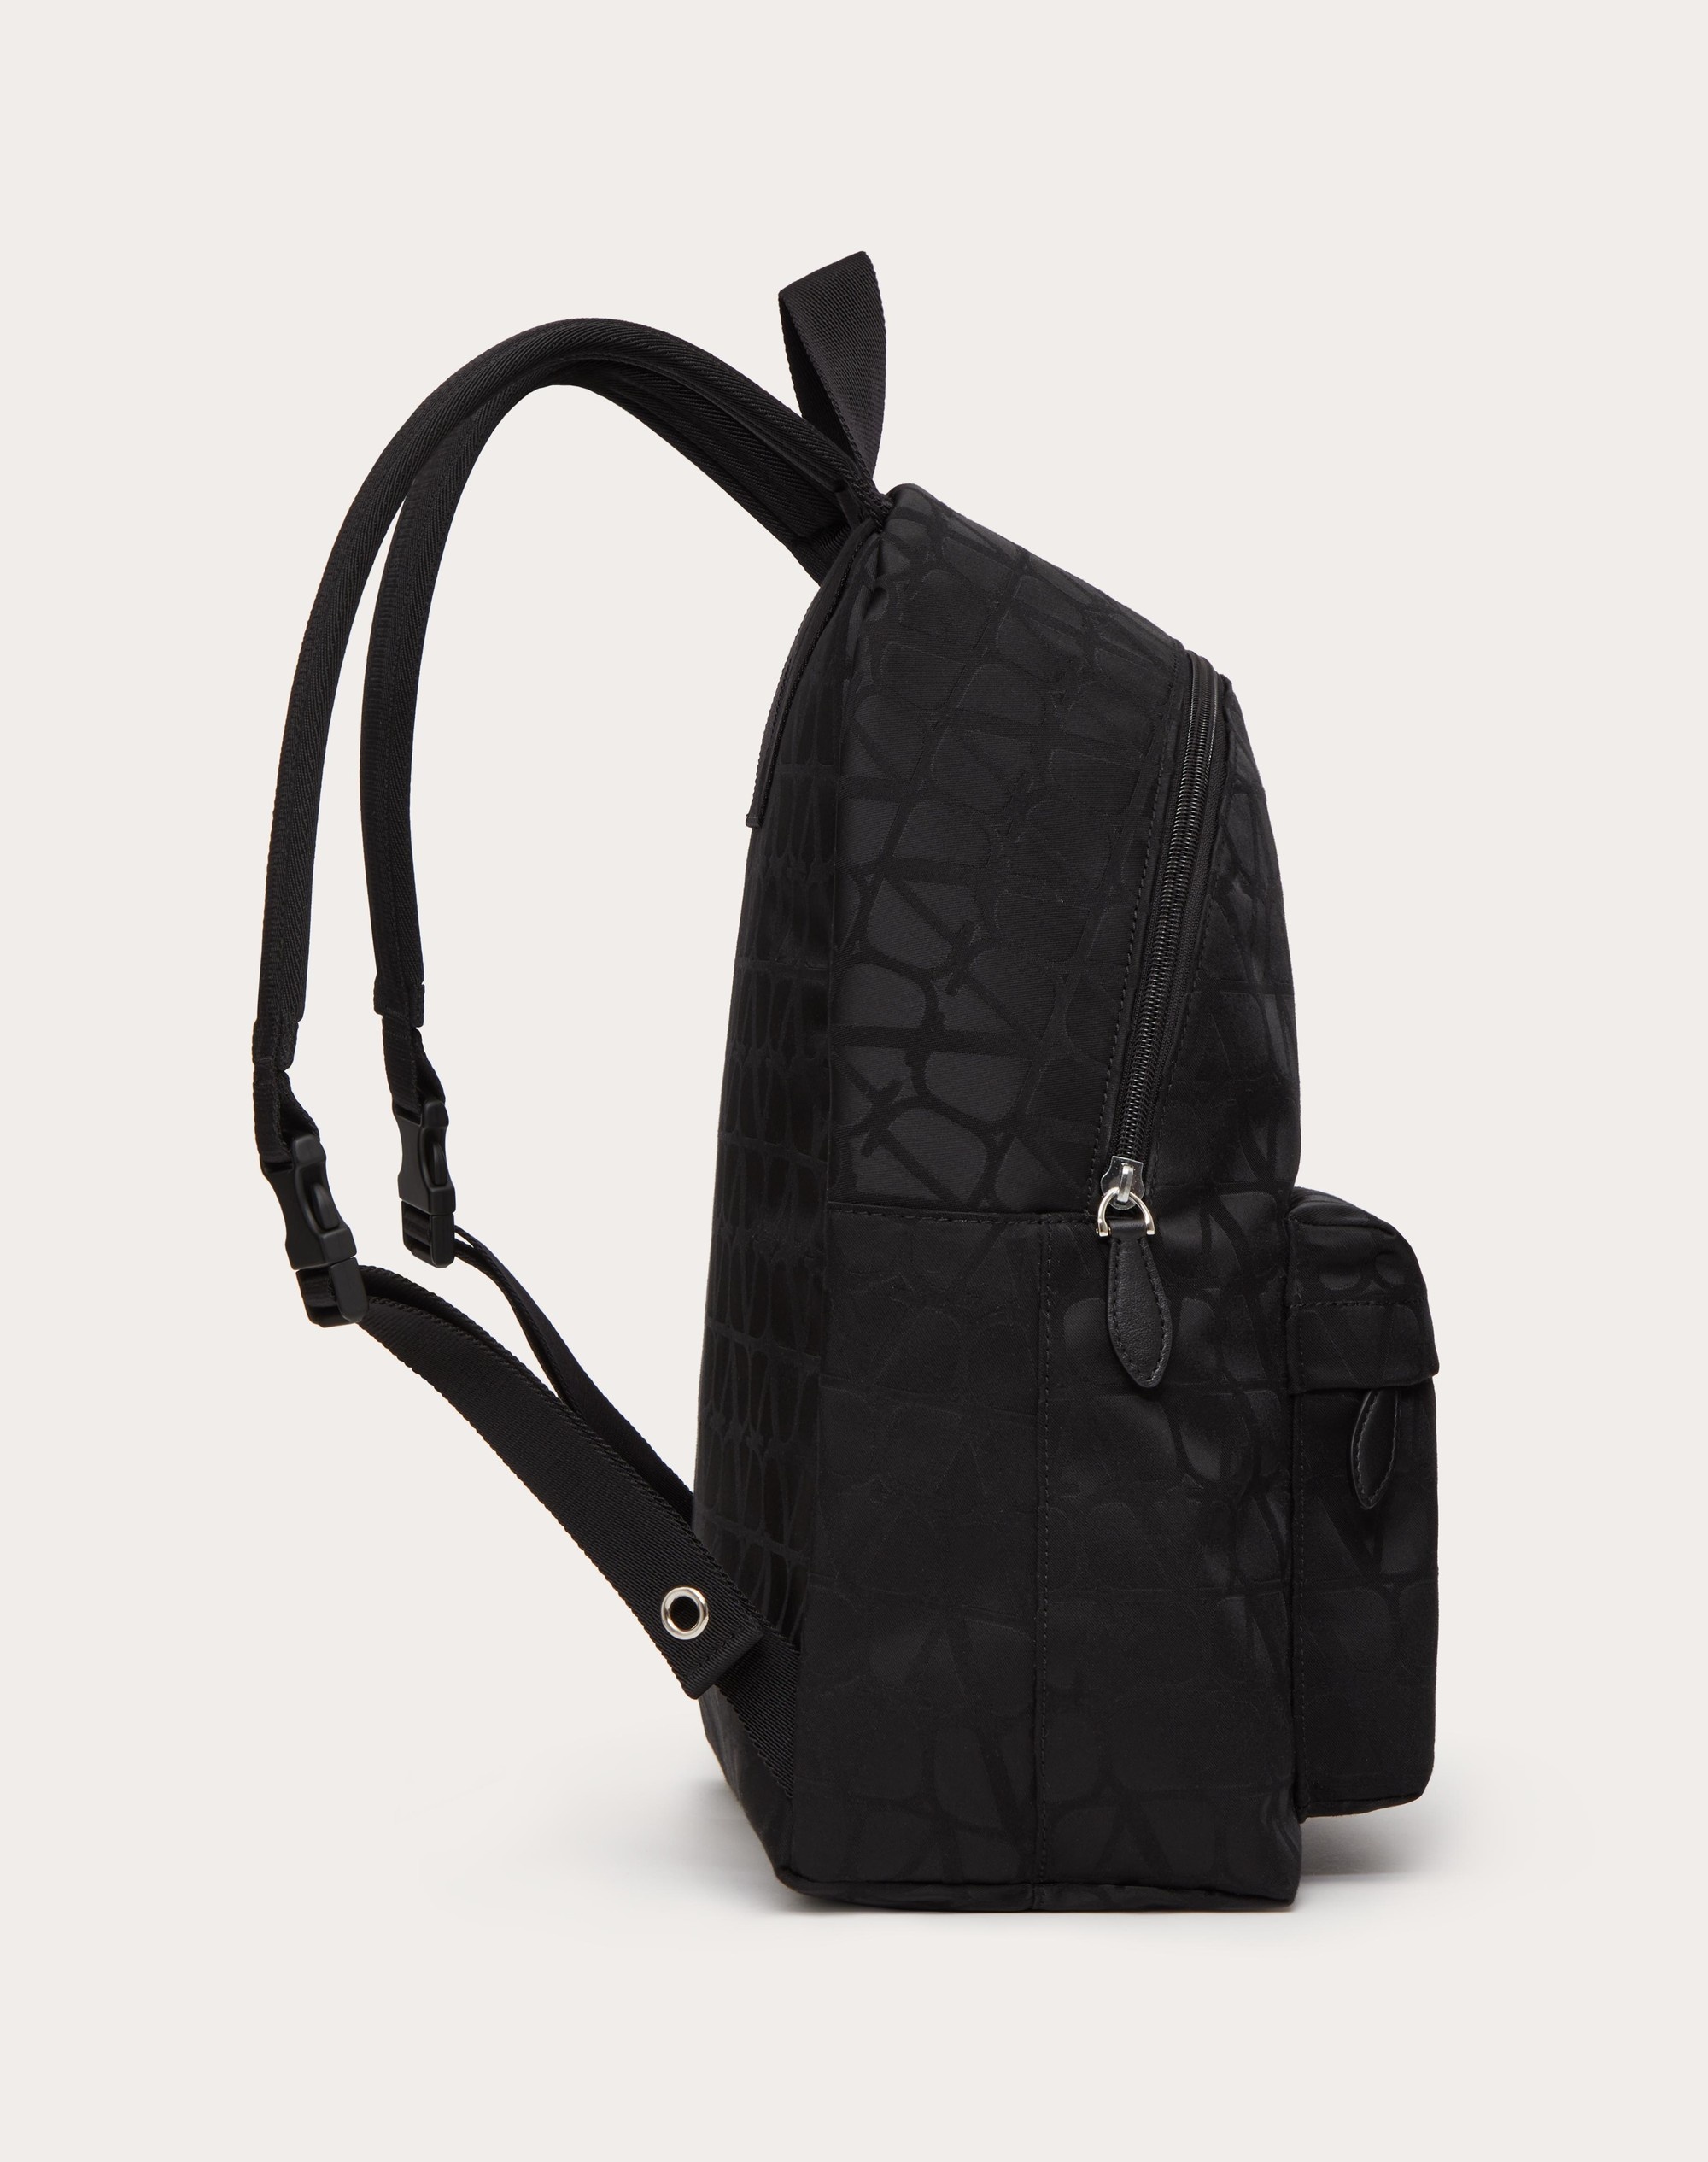 TOILE ICONOGRAPHE BACKPACK IN TECHNICAL FABRIC - 5